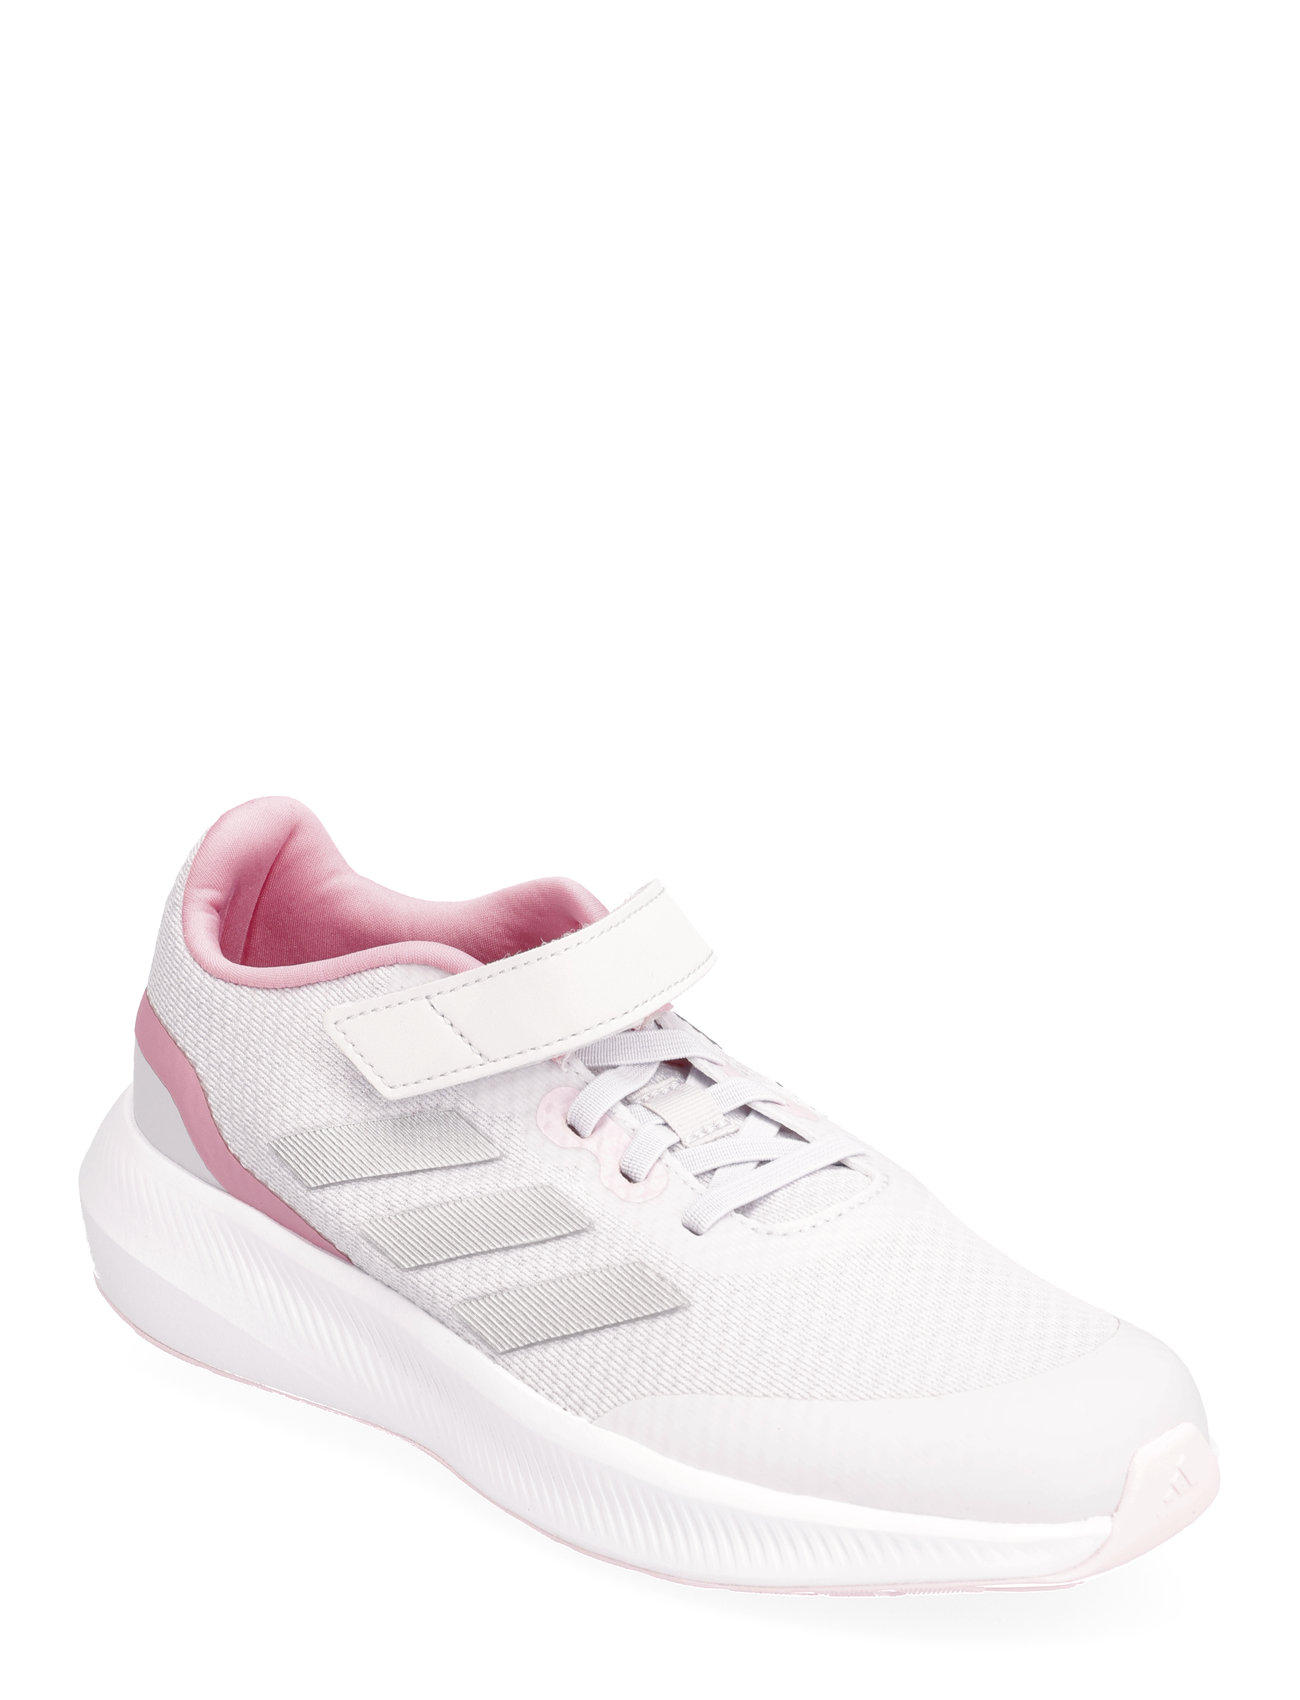 adidas Sportswear Runfalcon 3.0 Elastic Lace Top Strap Shoes - Sneakers